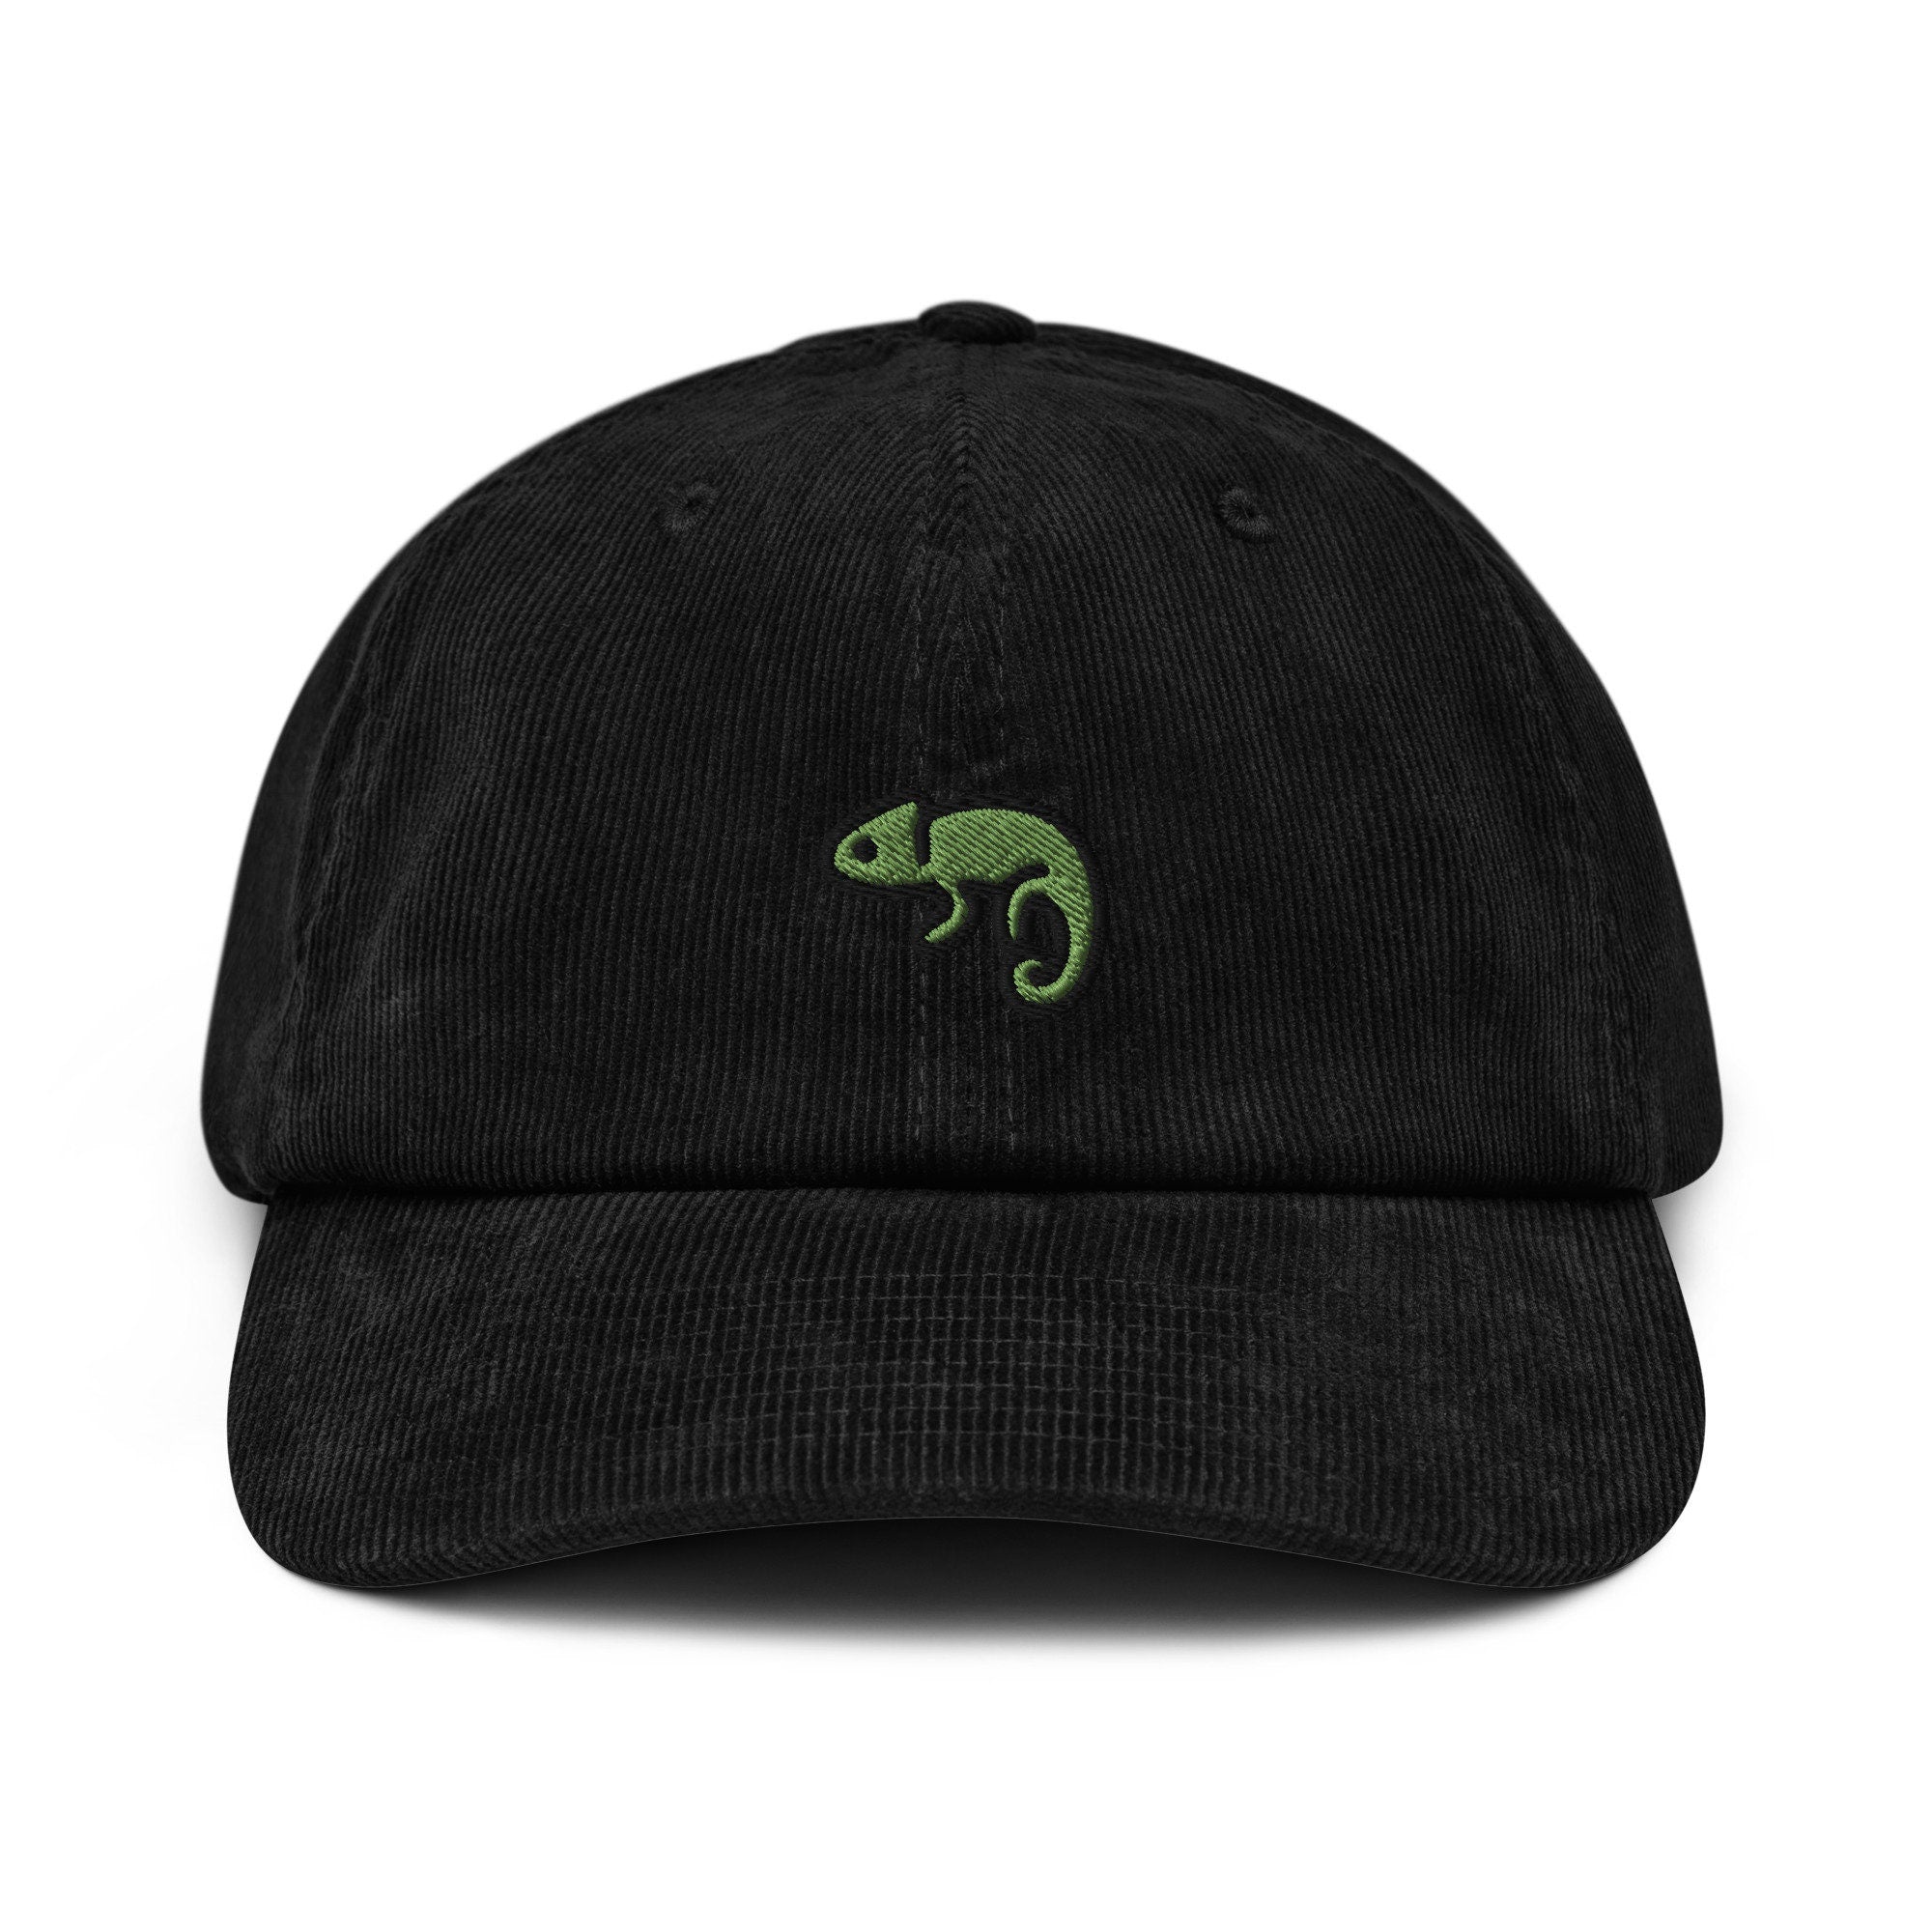 Camelion Embroidered Corduroy Hat, Handmade Lizard Cap Embroidery, Green Chameleon Embroidered Cap - Multiple Colors